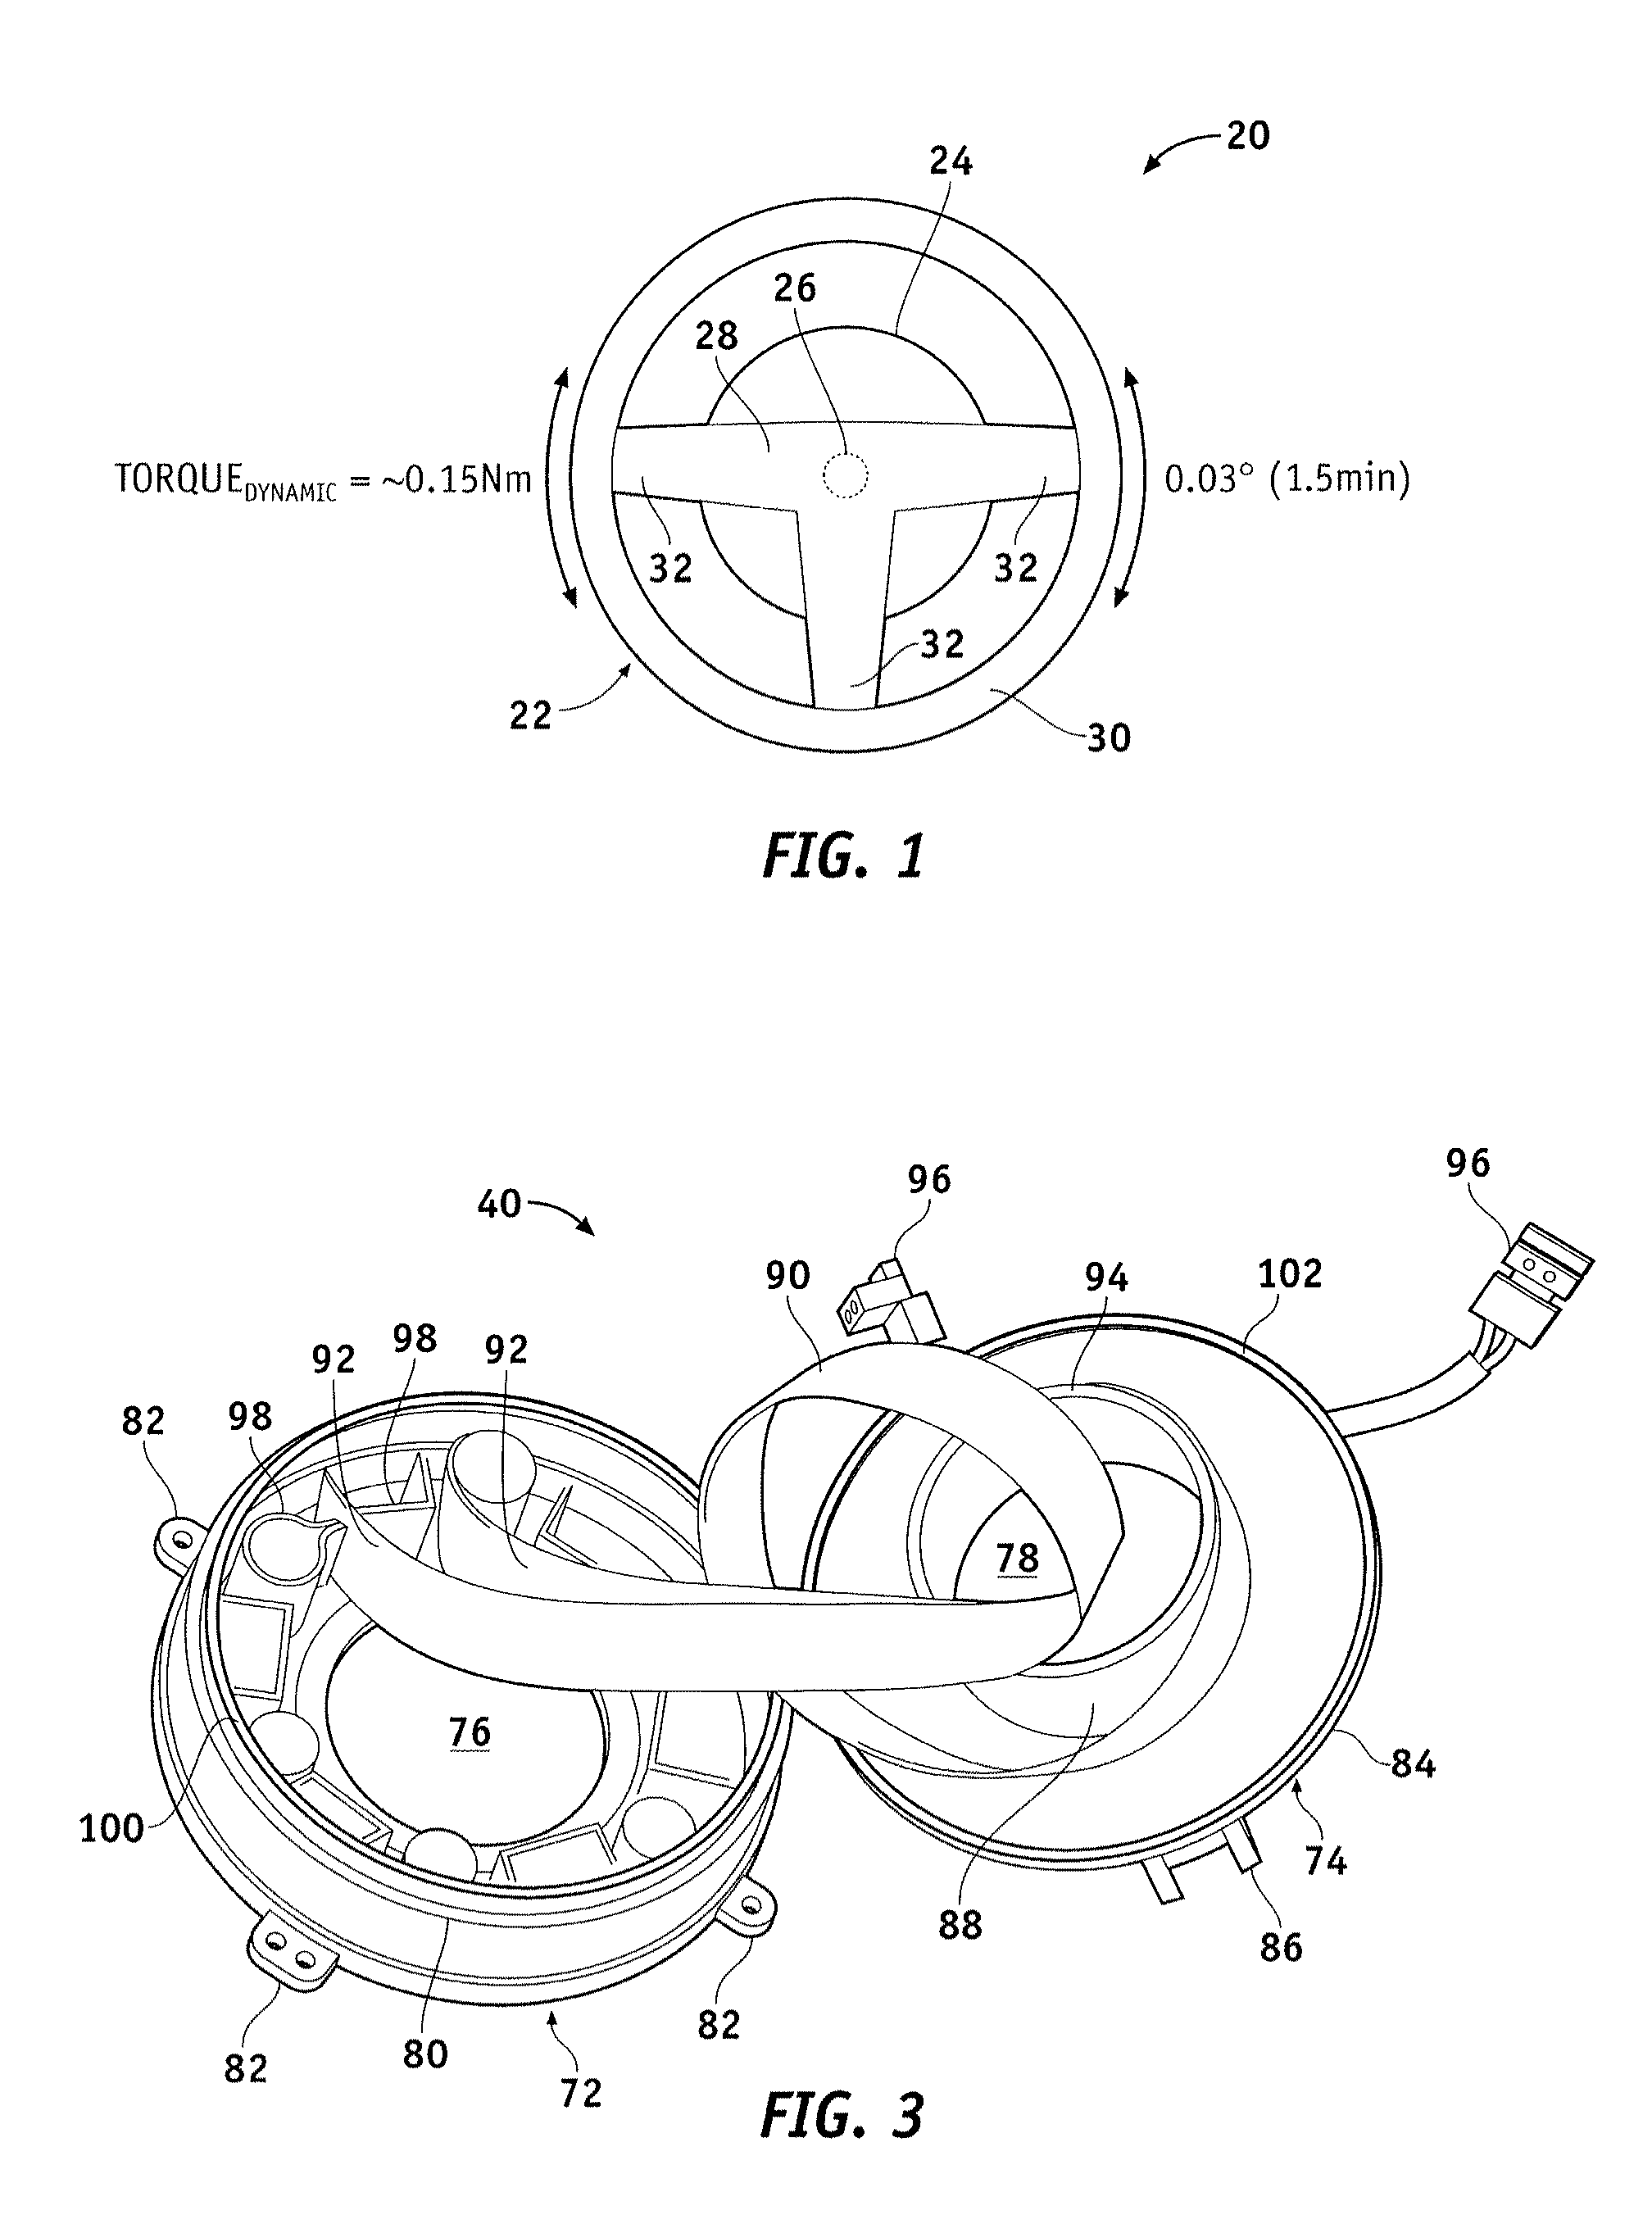 Vehicular steering wheel and column assembly including torsional damper device